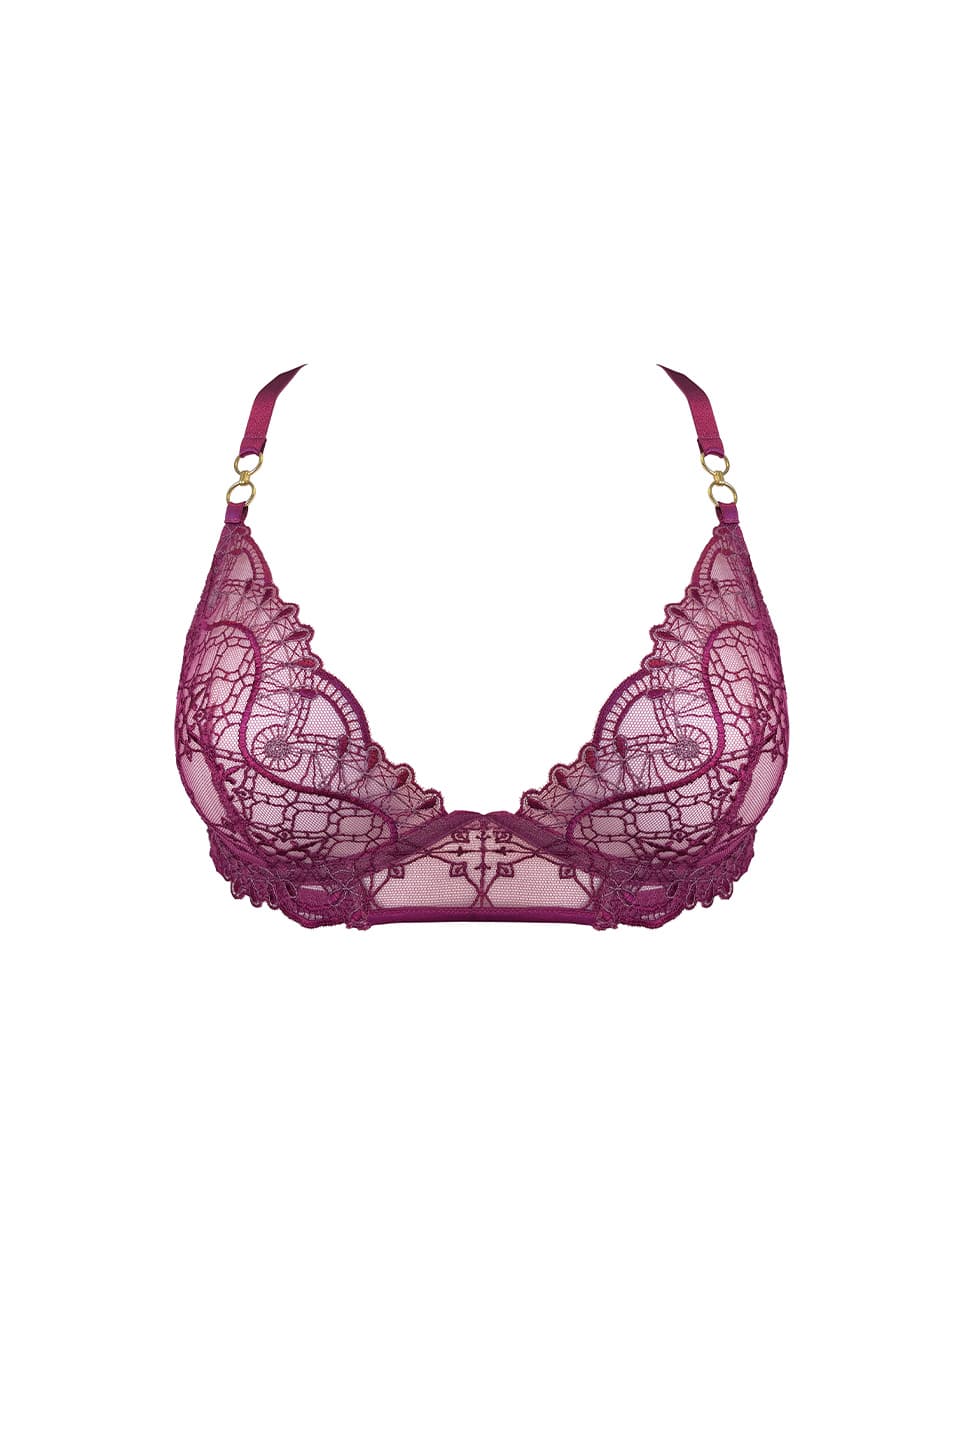 Shop online trendy Pink Bras from Bordelle Fashion designer. Product gallery 1